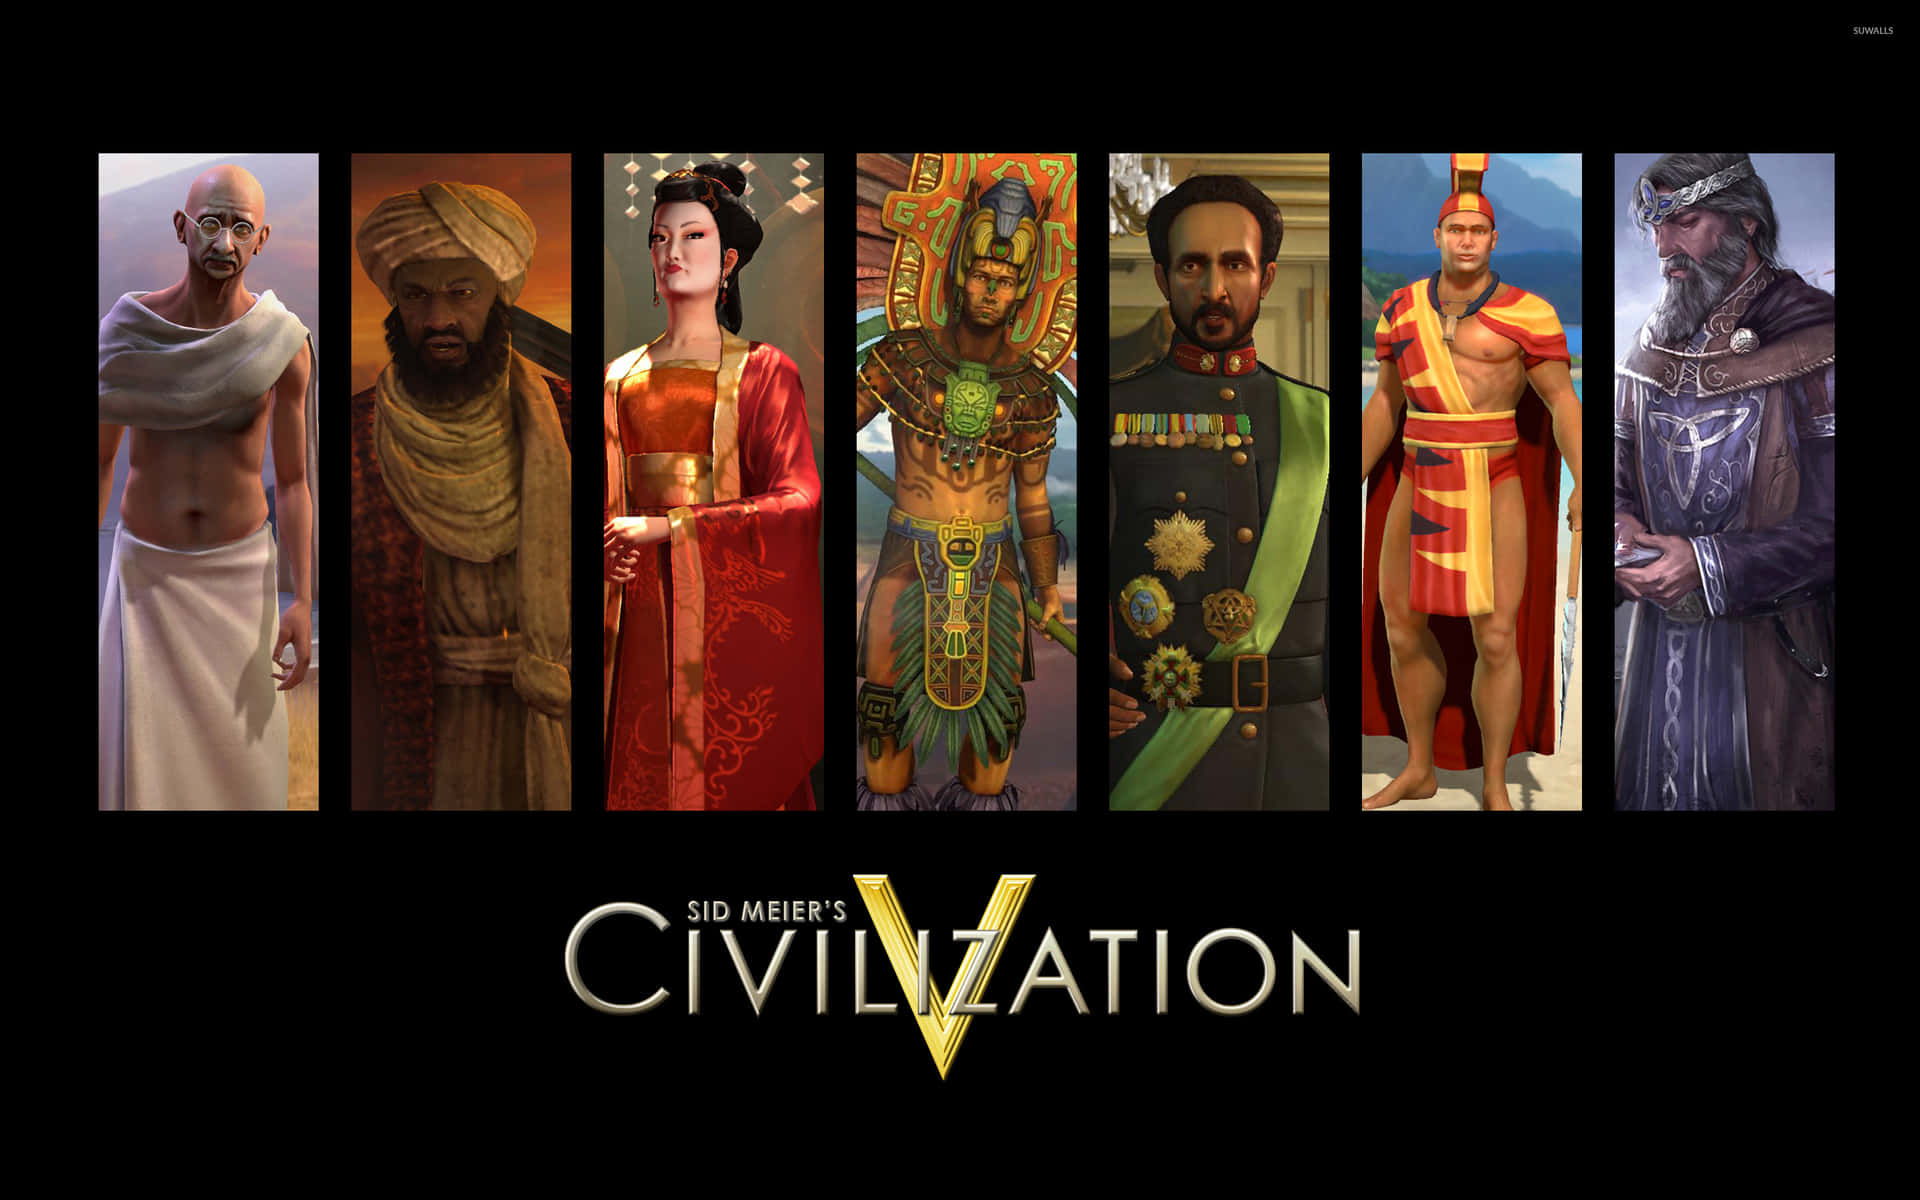 Advance your Civilization with 1080p HD Quality